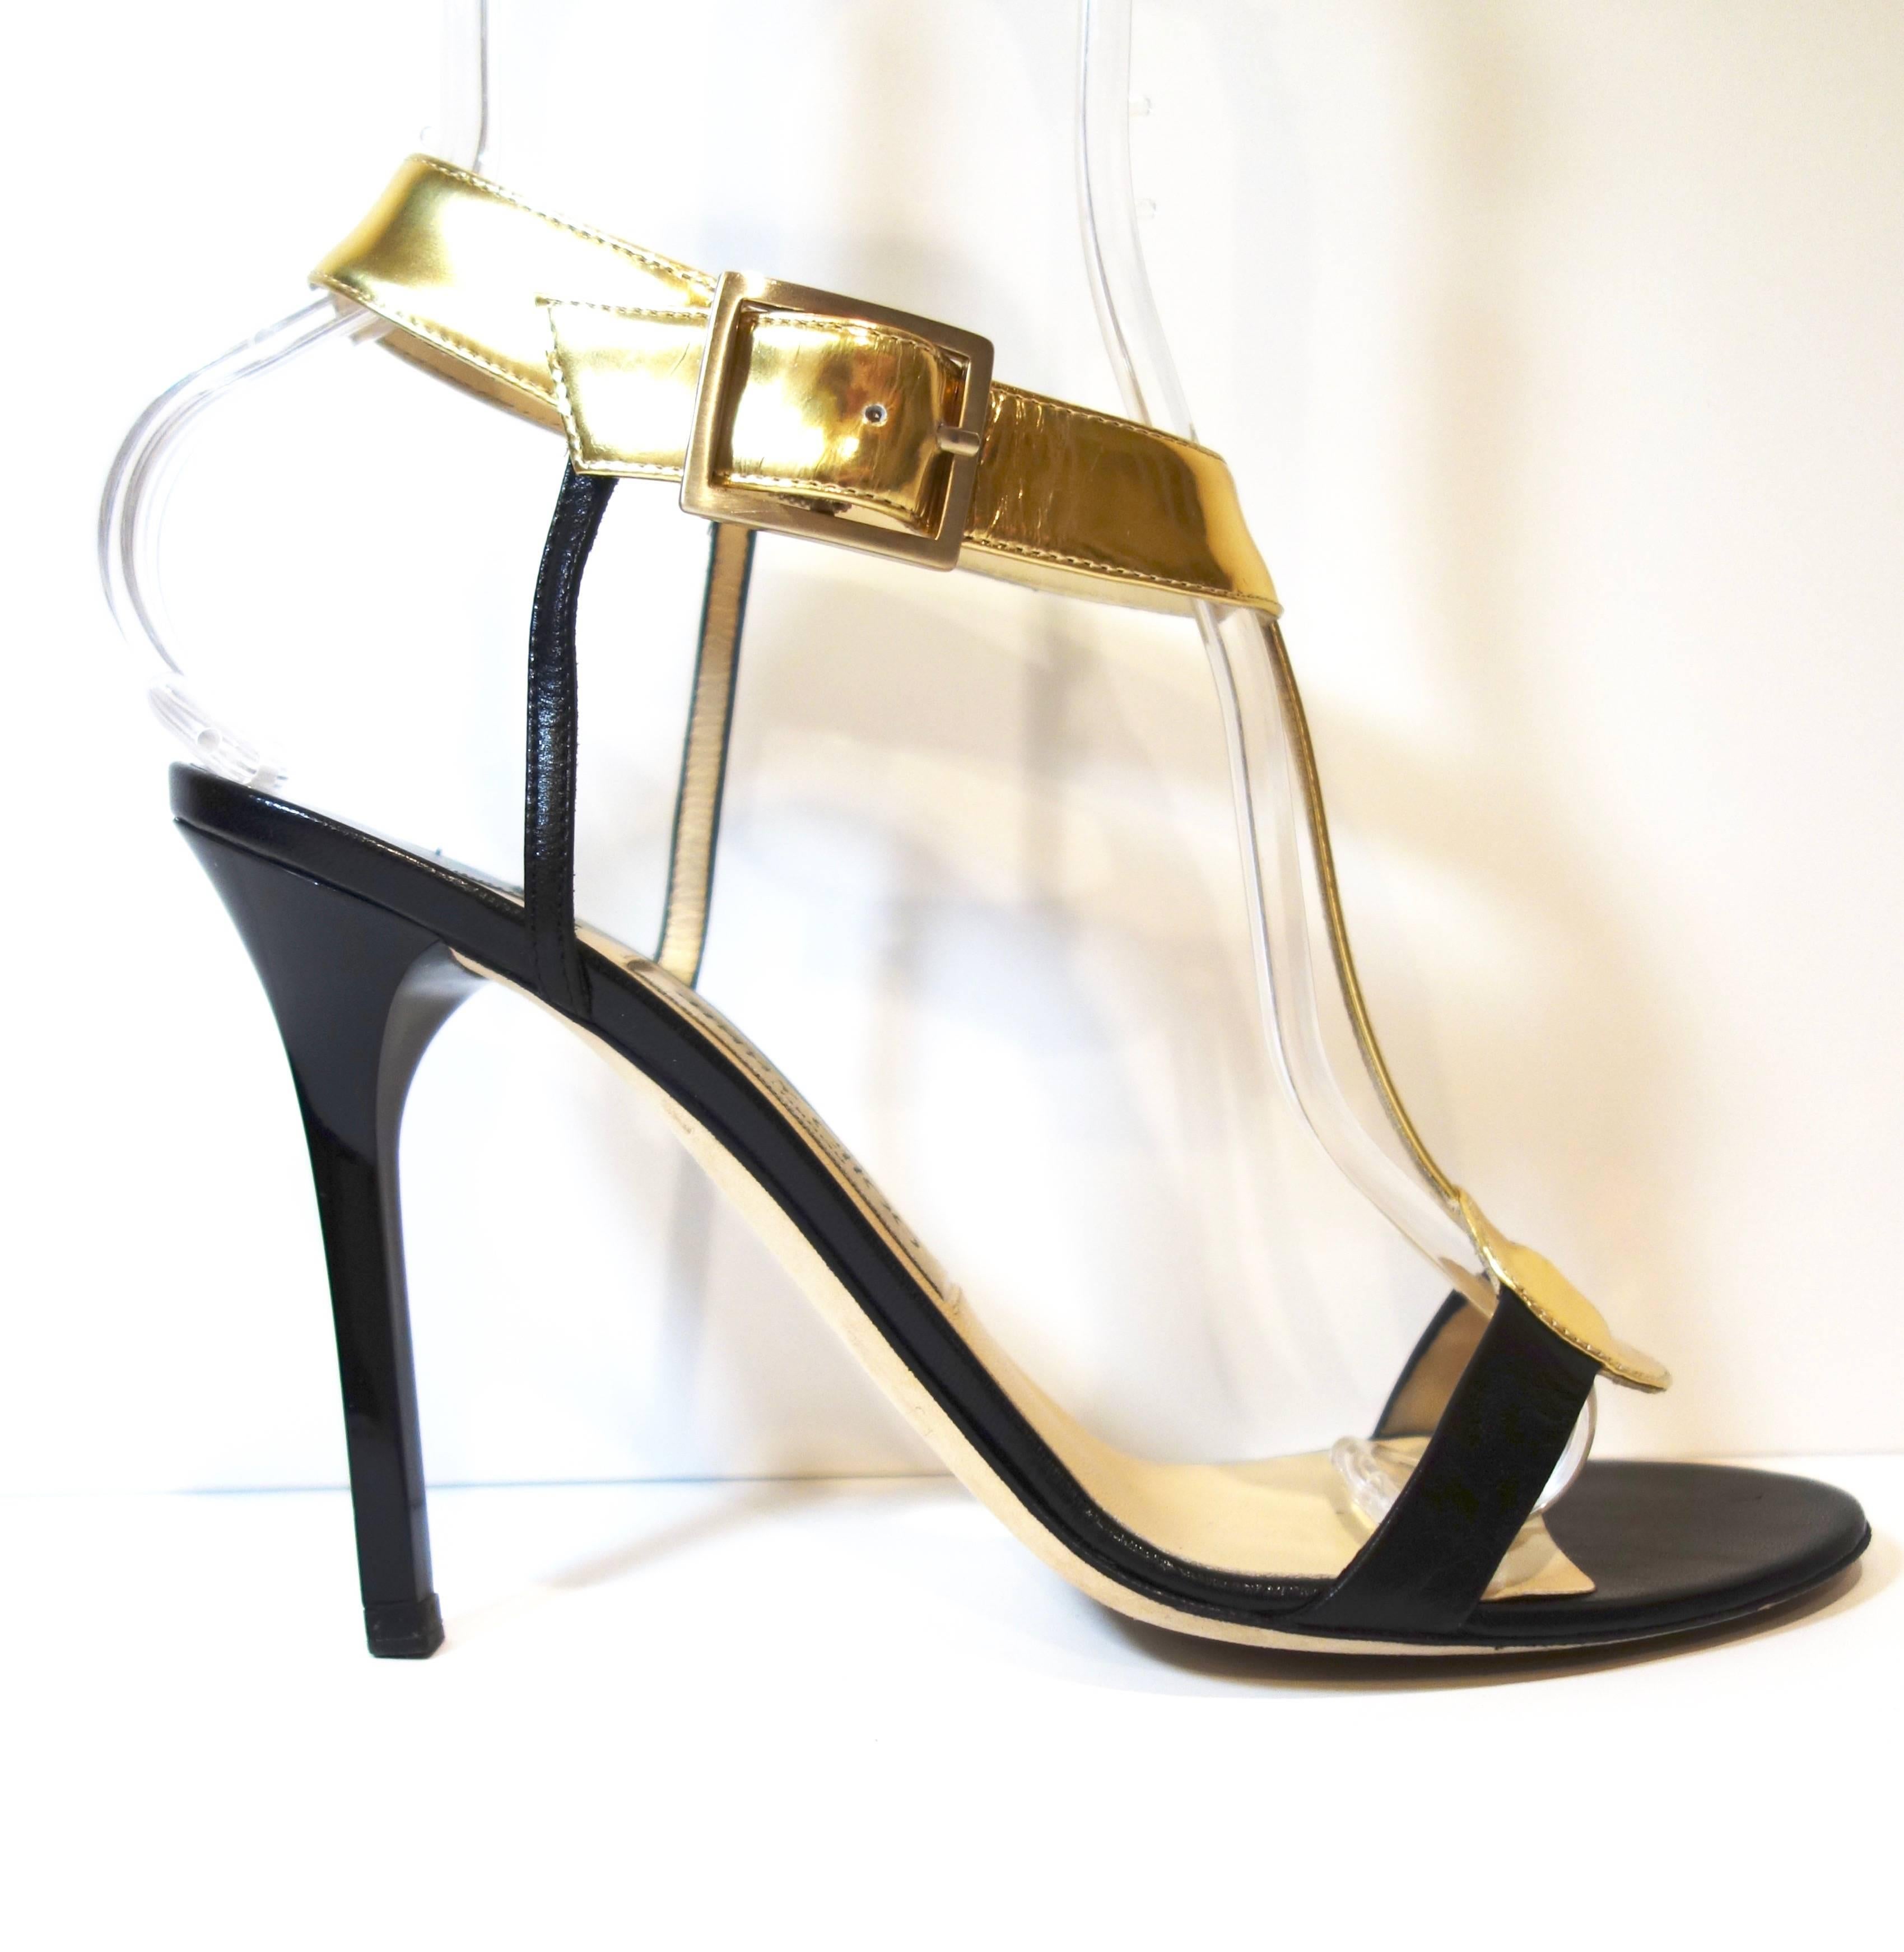 Jimmy Choo Black Leather Mirrored T-Strap Latch Sandals
Size: 38.5
Retail was: $595 
Color: Black / Gold
Smooth leather upper with mirrored leather detail. Rounded open toe.
Mirrored leather t-strap. Adjustable ankle strap with goldtone